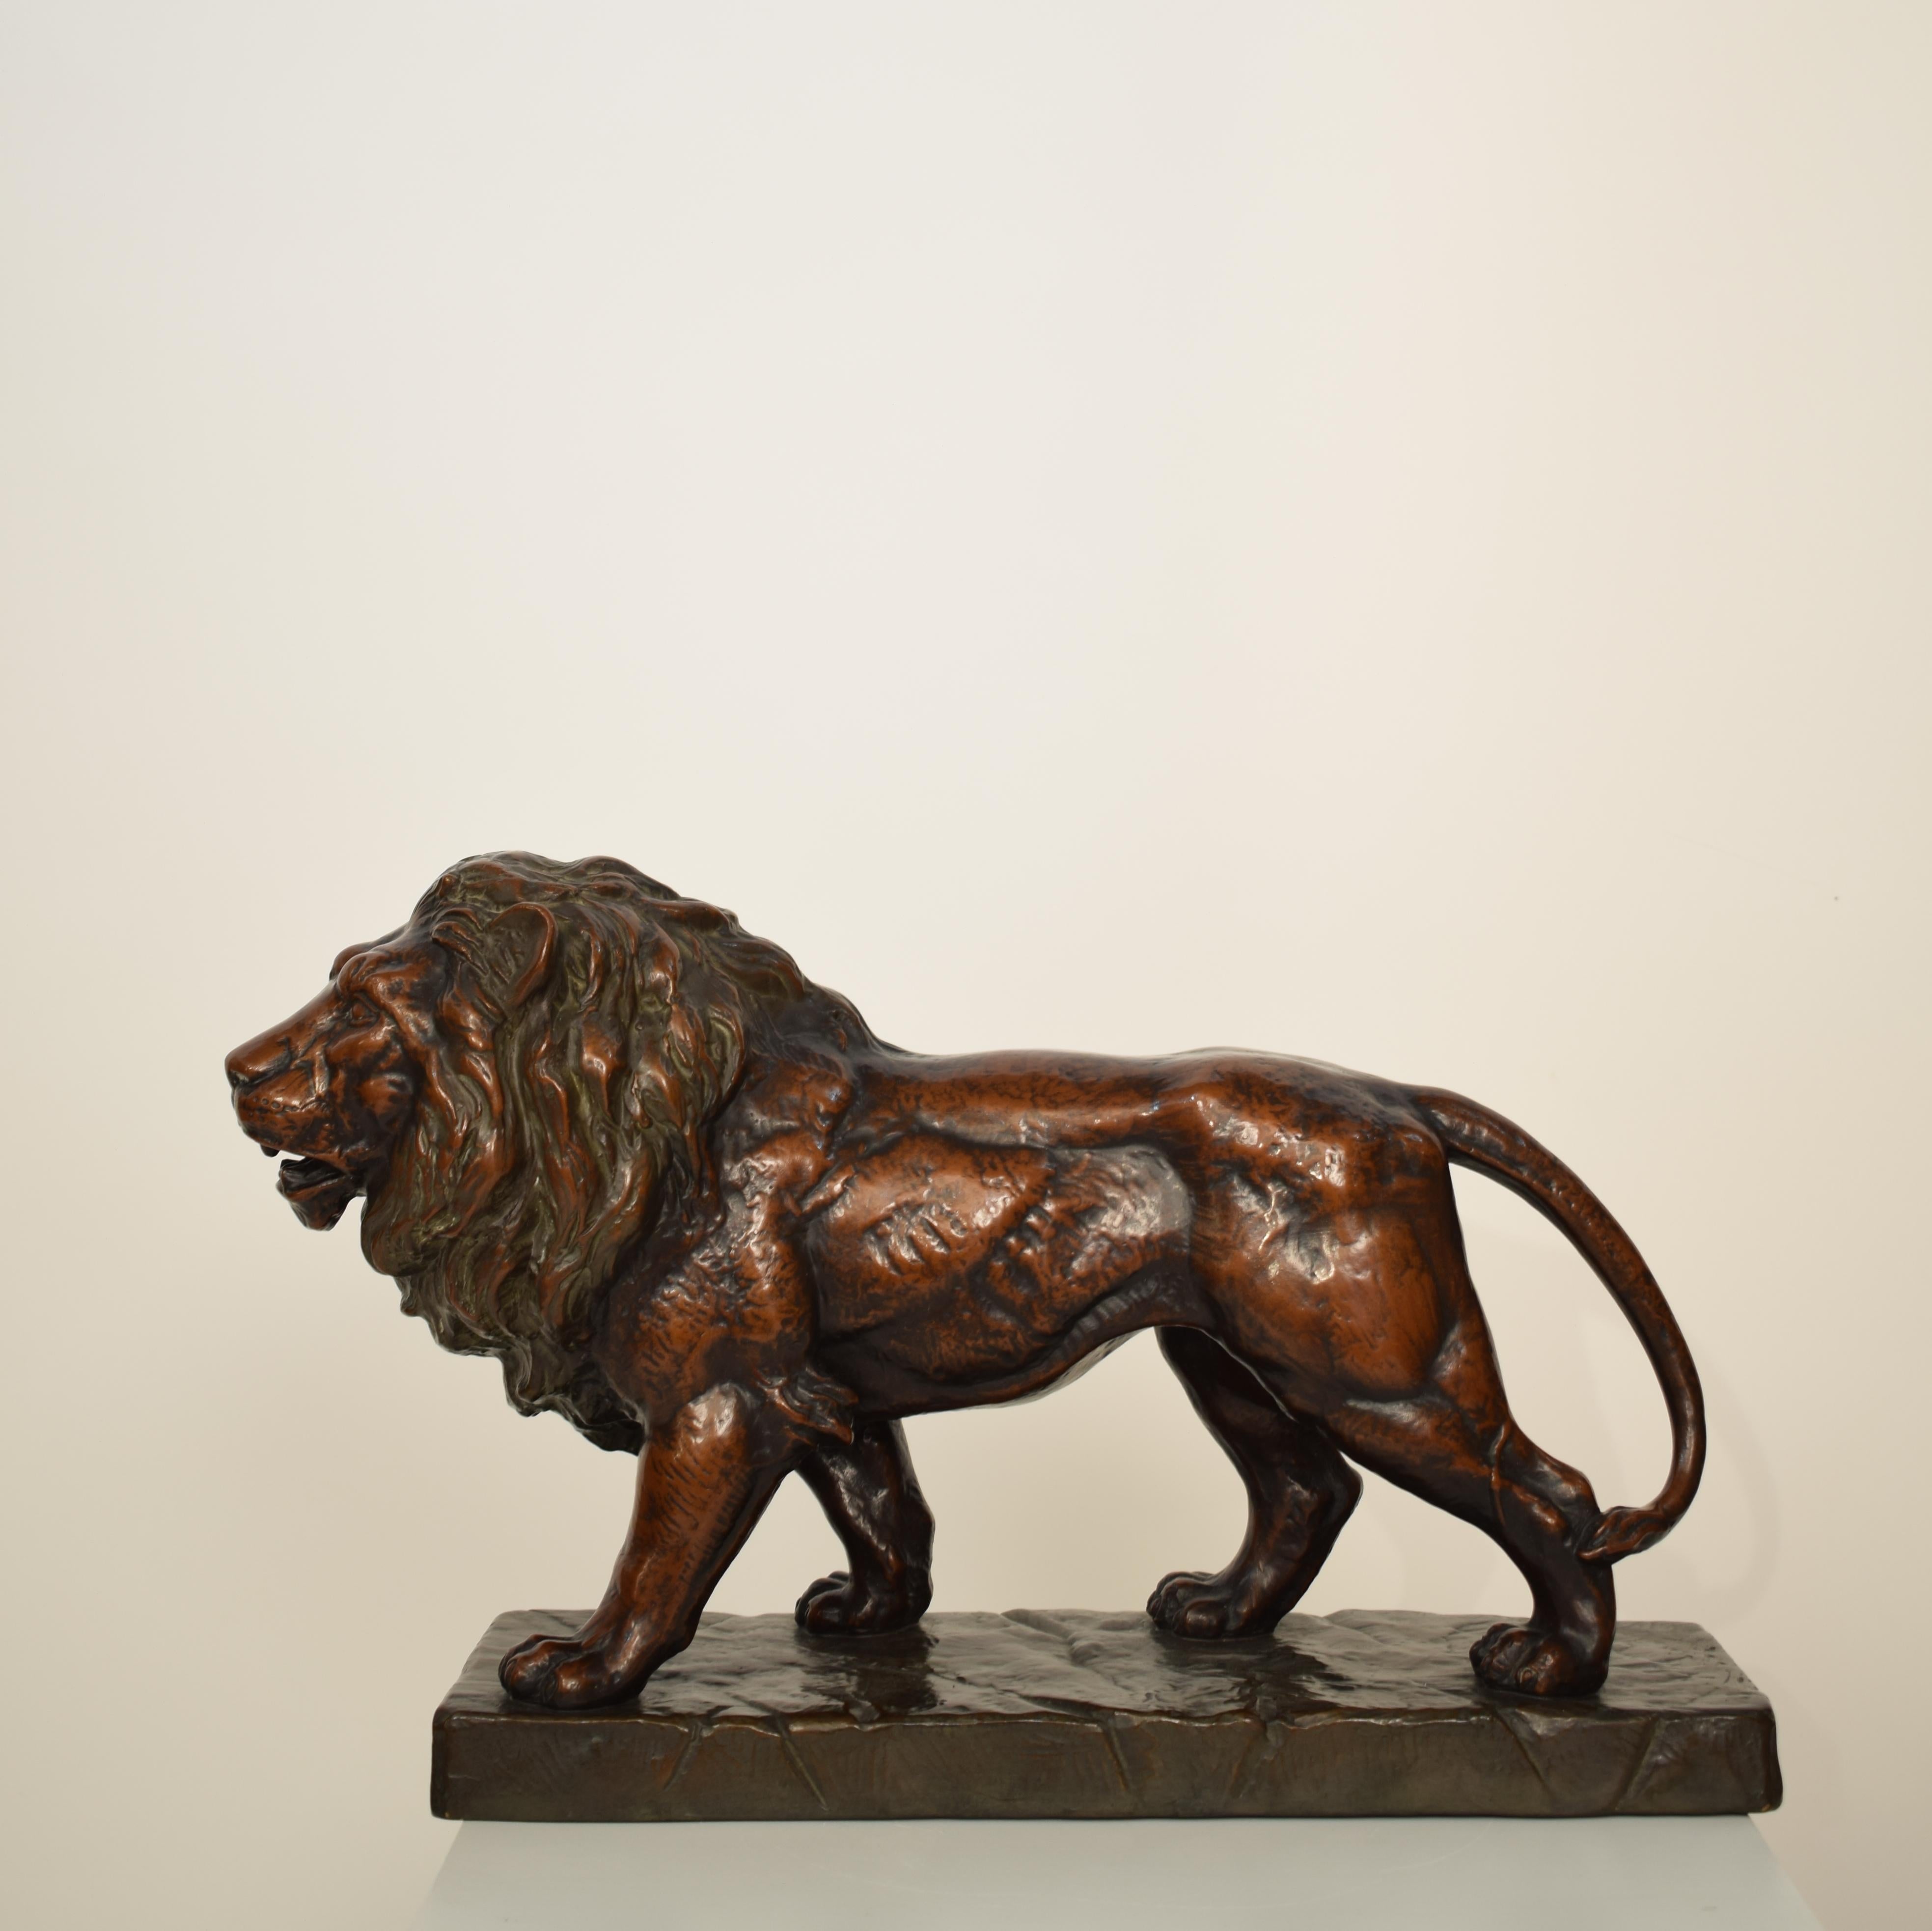 This very fine German Art Deco lion sculpture in ceramic, terracotta and a copper finish was made in the 1930s by EJM.
It is in a perfect antique condition with no chips and beautiful patina.
A unique piece which is a great eyecatcher for your